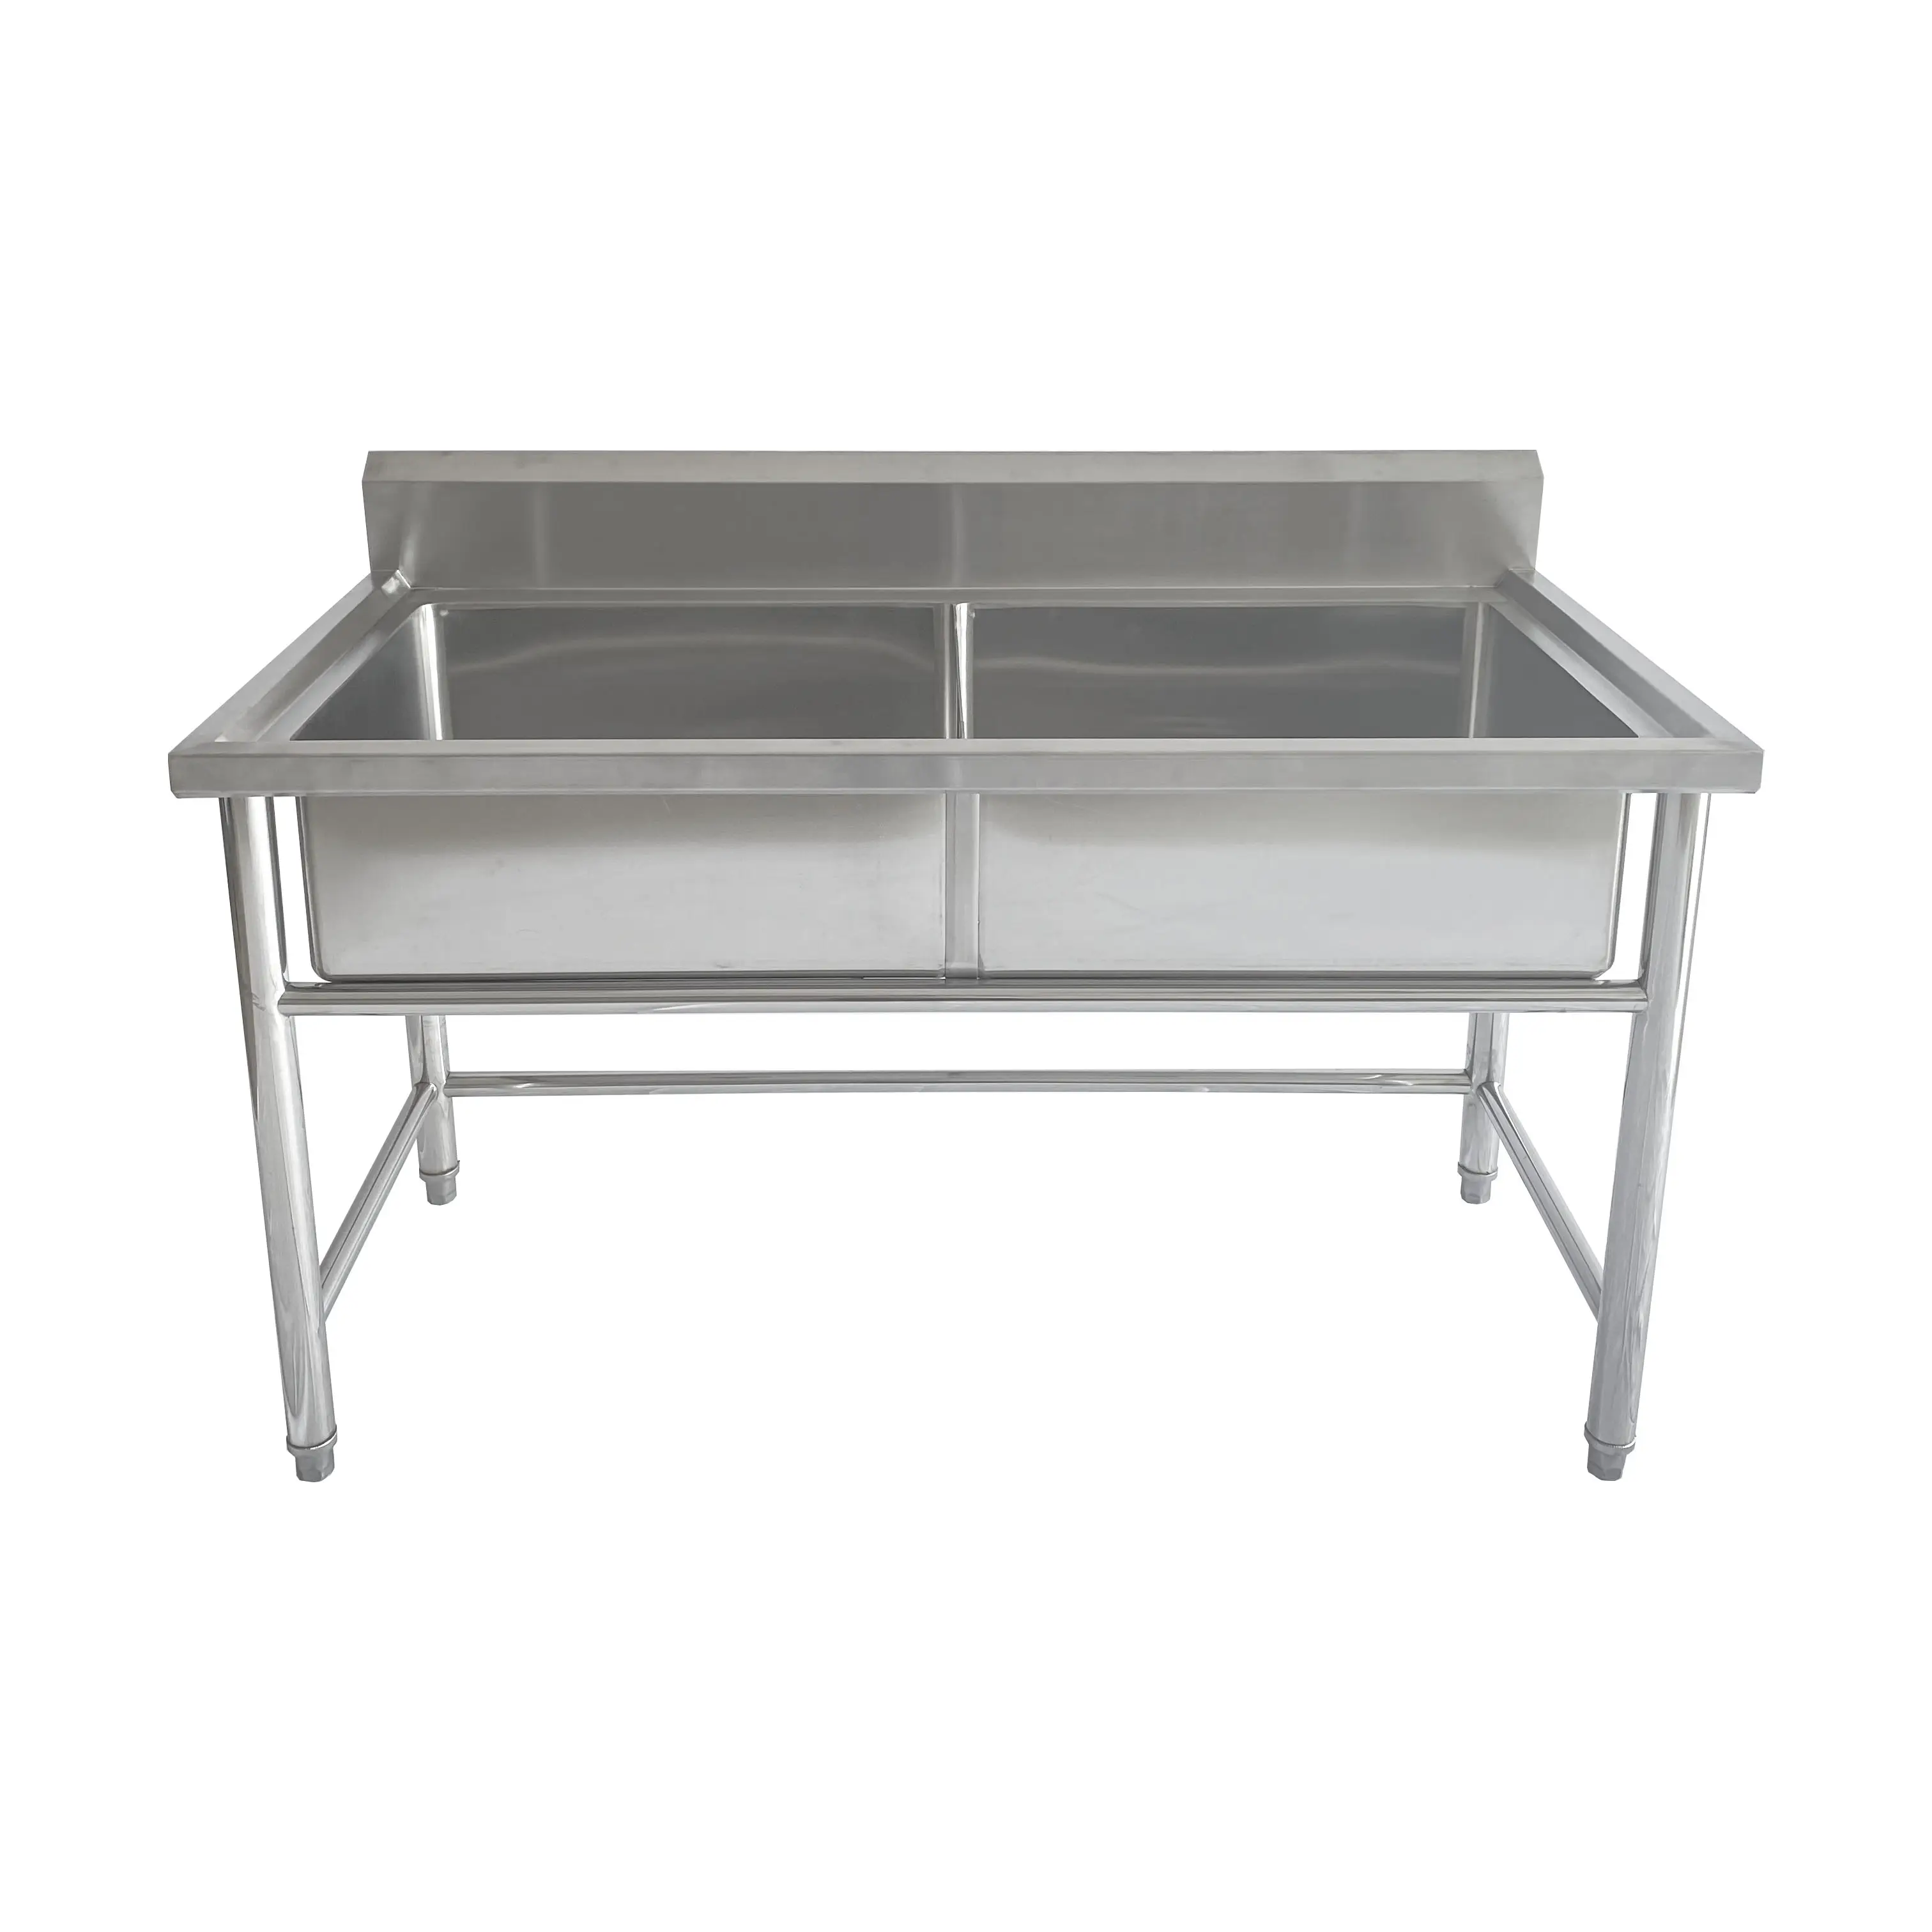 Stainless Steel Industrial Double Bowl Sink Workbench Table Commercial Kitchen Sink Wash Basin